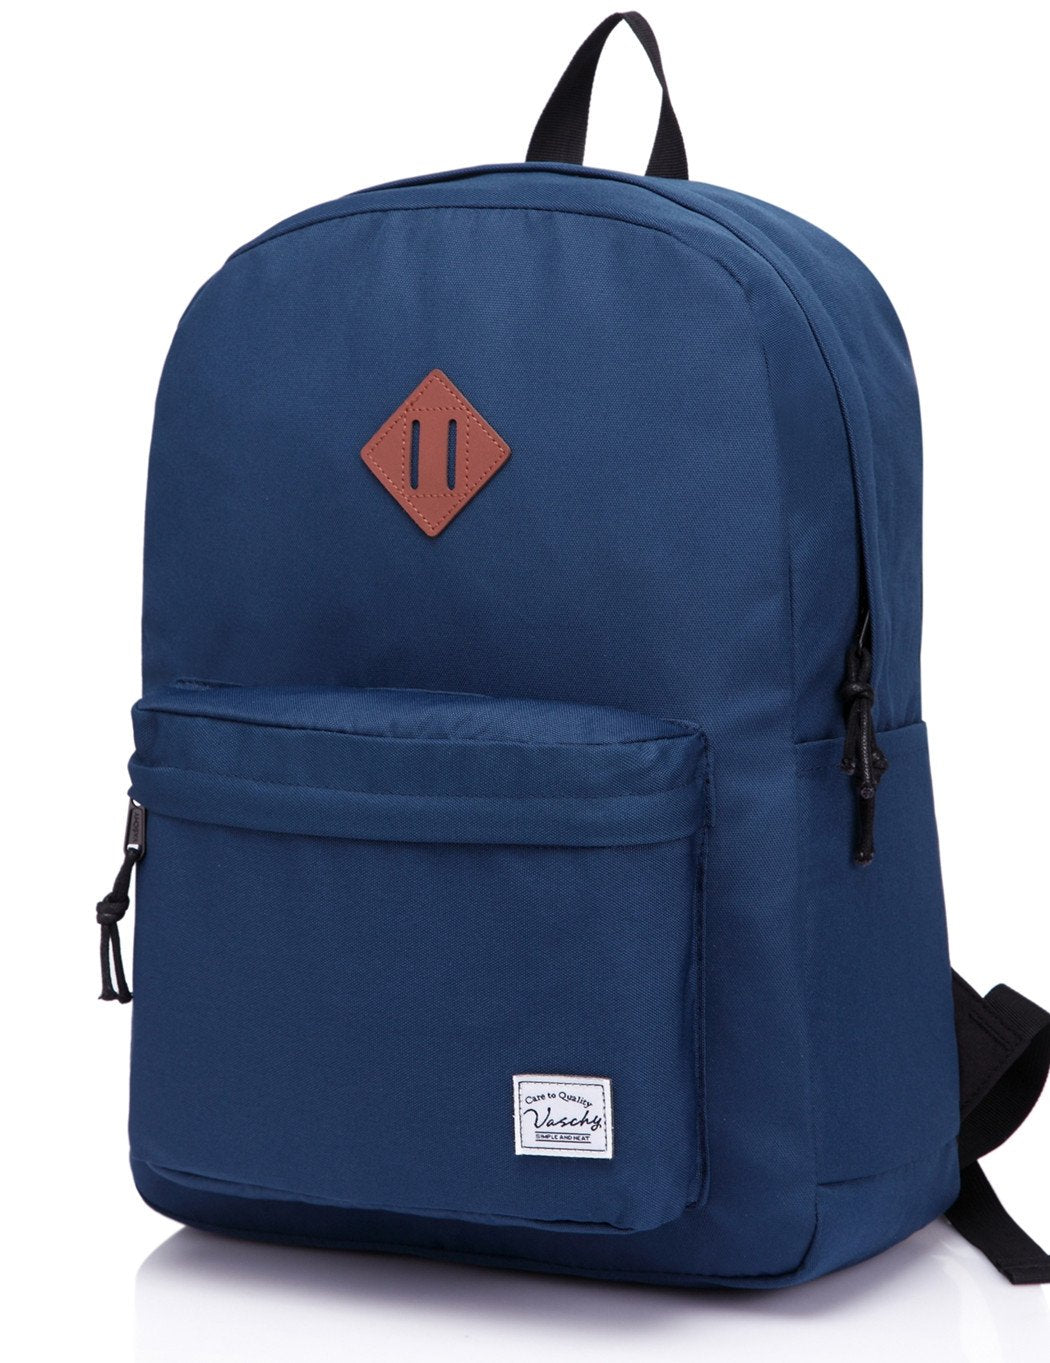 Lightweight Backpack for School, VASCHY Classic Basic Water Resistant ...